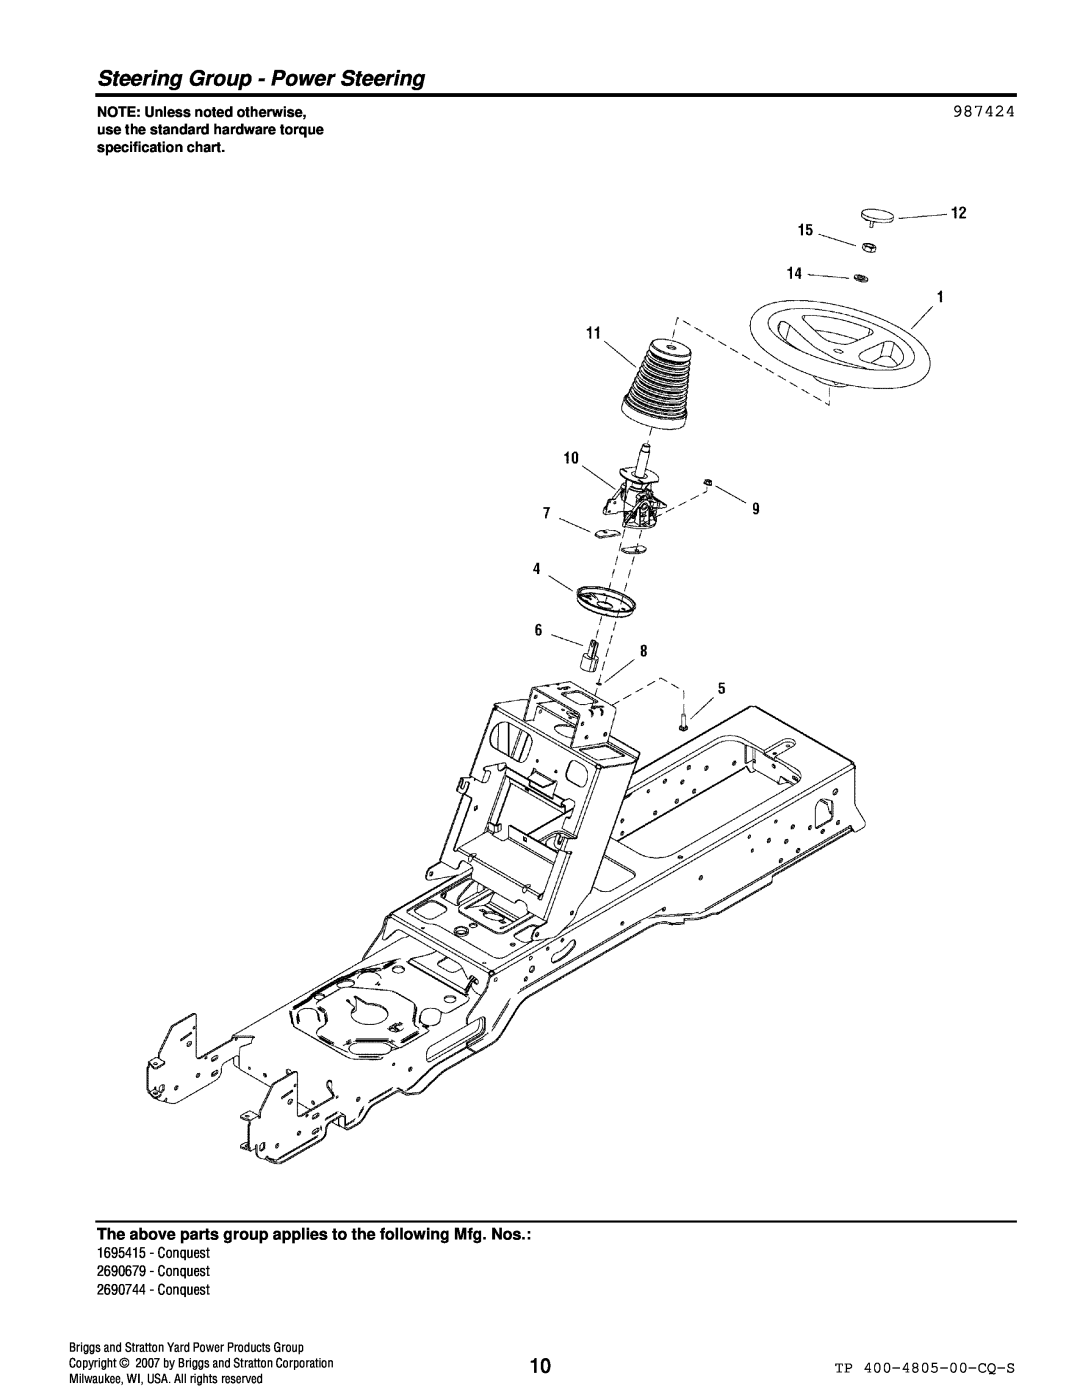 Simplicity 4WD Series manual Steering Group - Power Steering, 987424, NOTE: Unless noted otherwise 